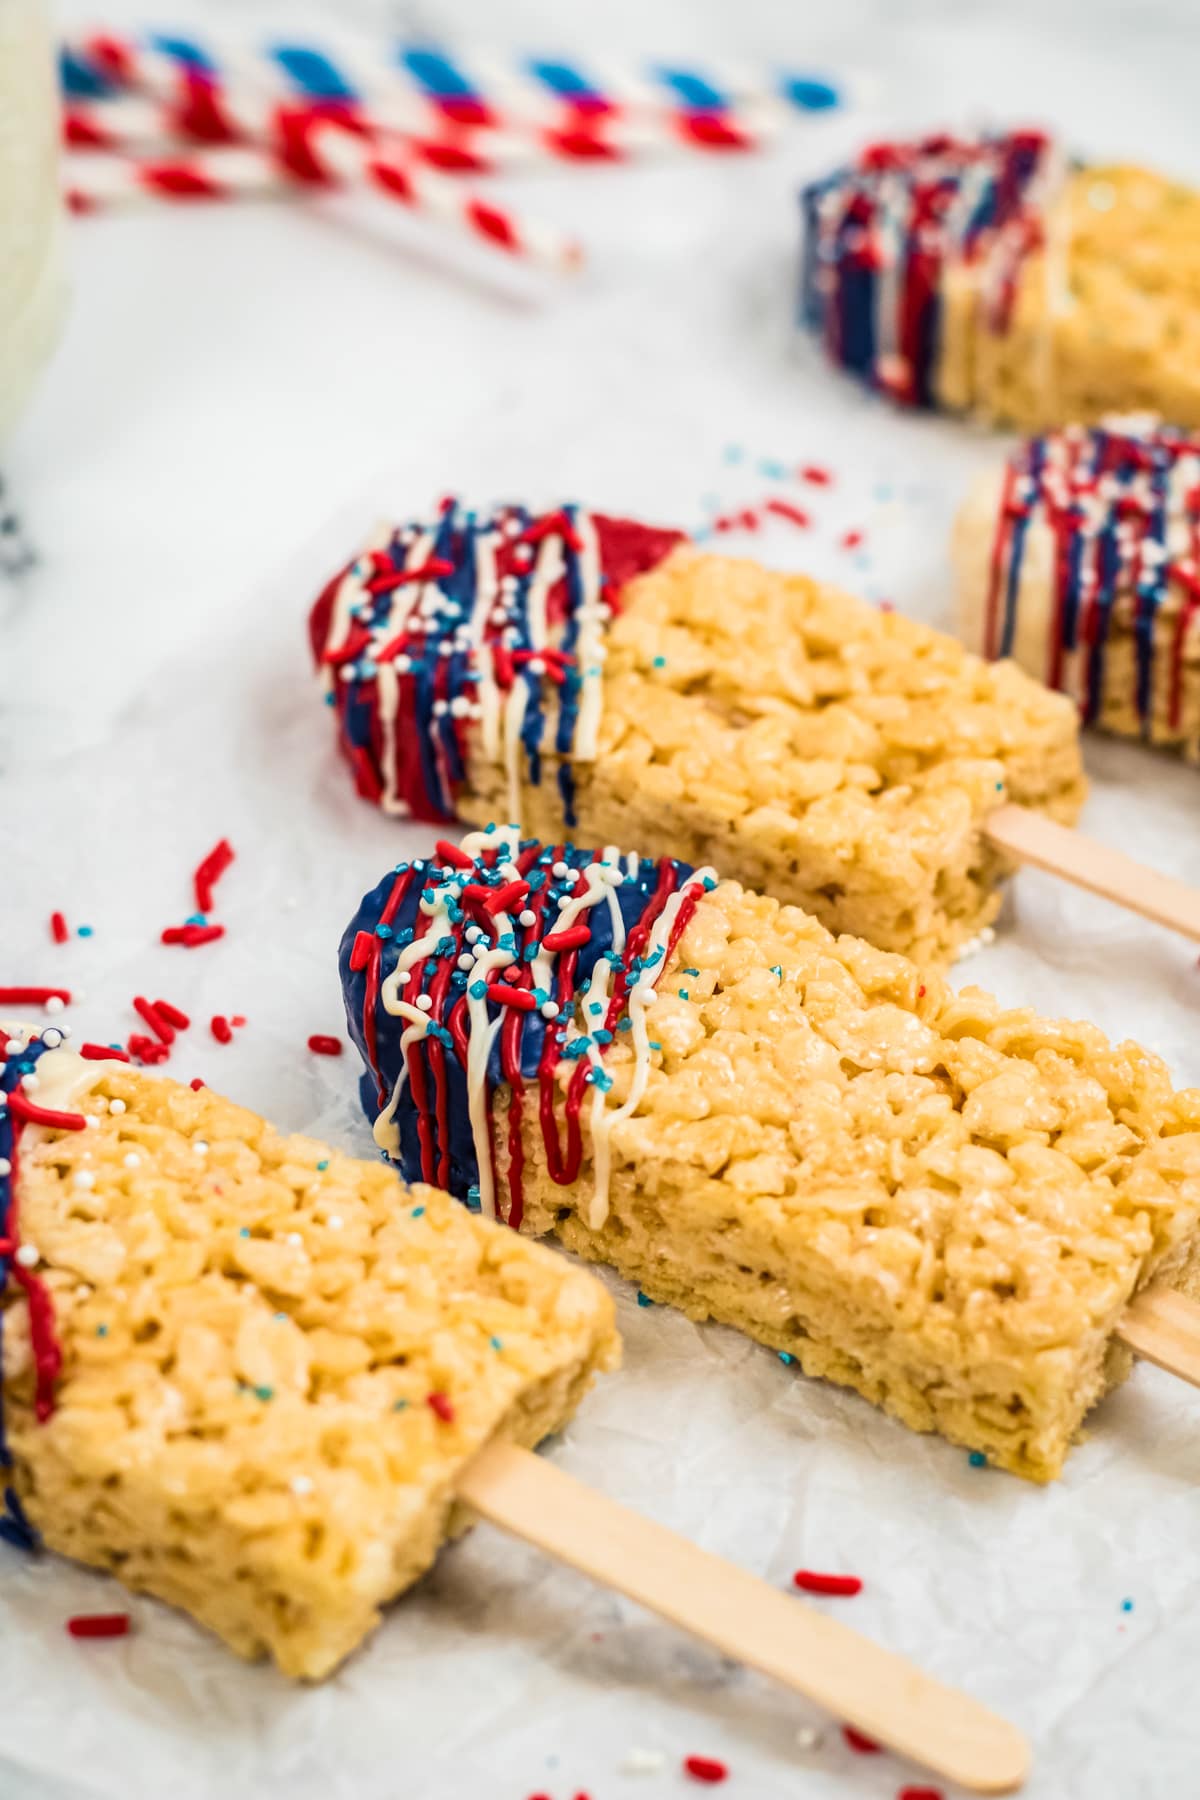 Mennonite Girls Can Cook: Rice Krispies Treat on a Stick